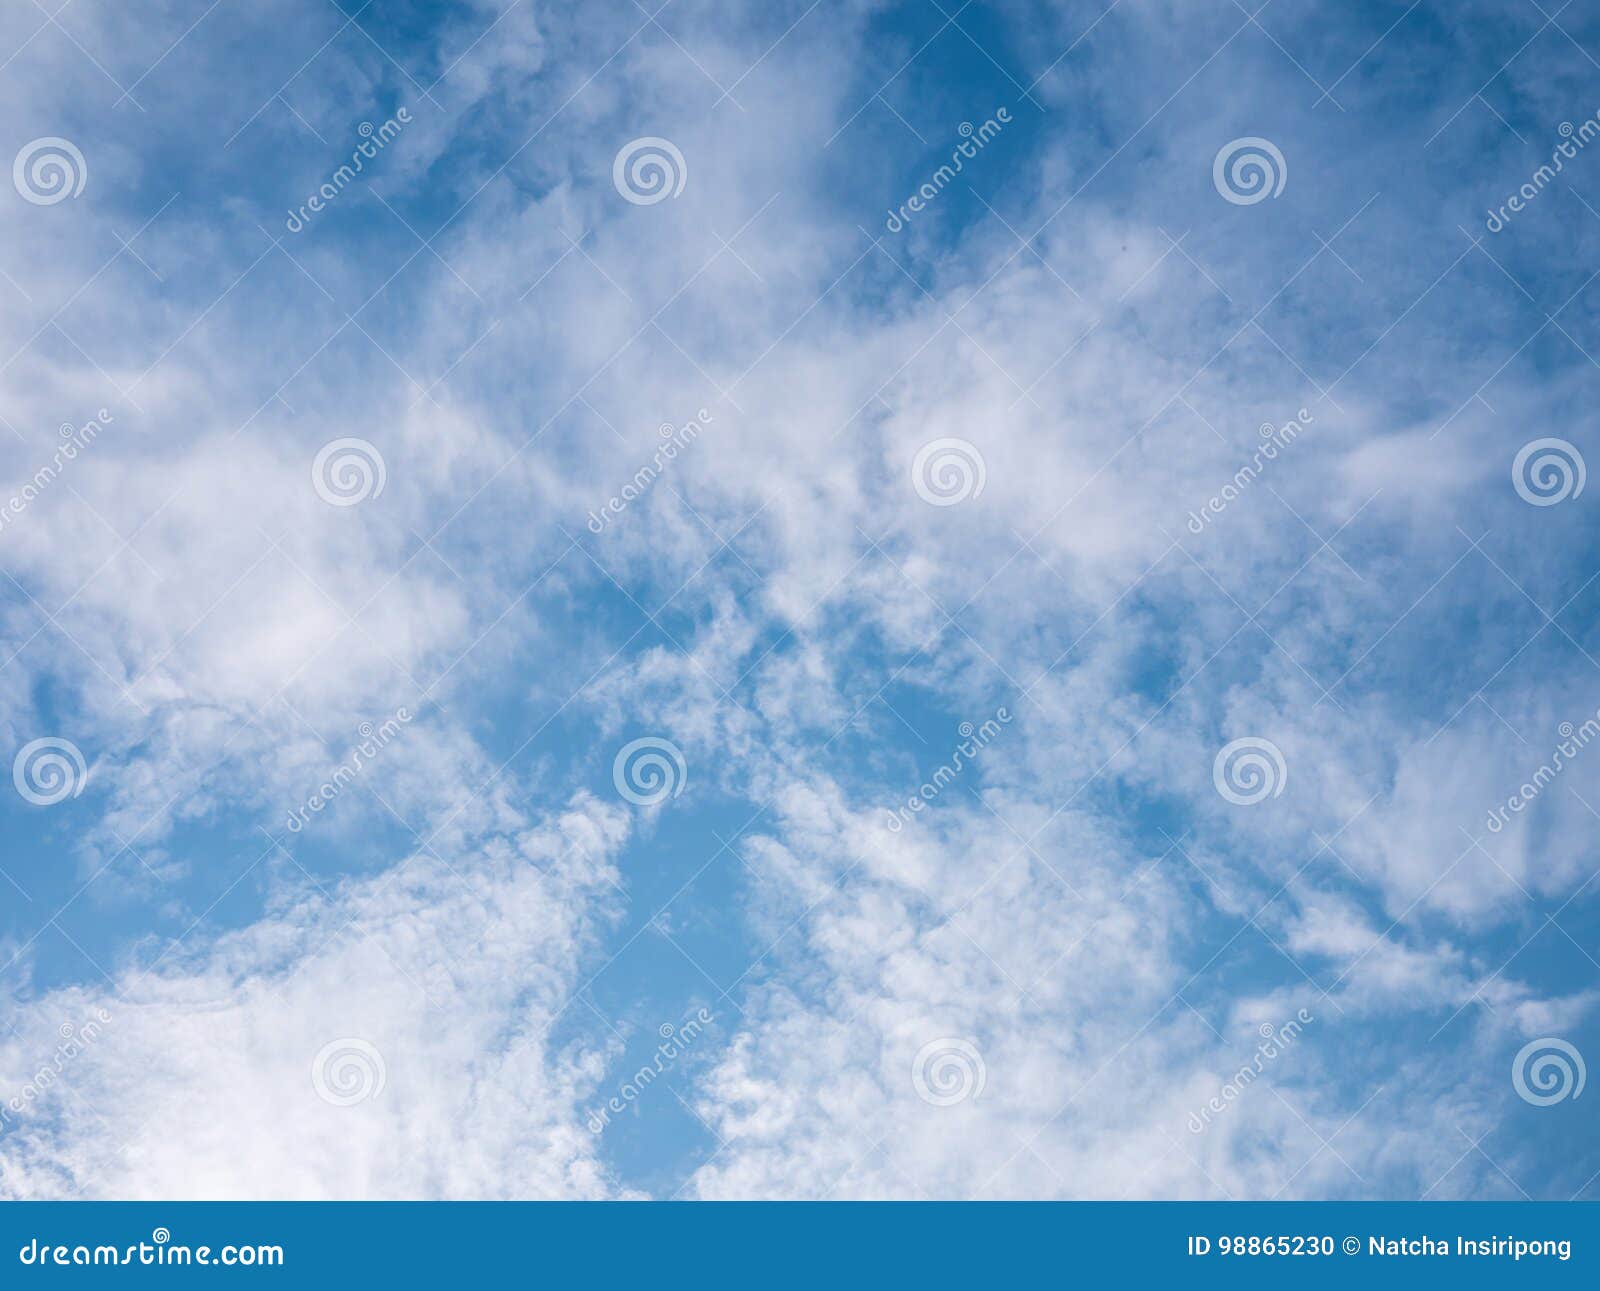 Gorgeous Blue Cloudy Sky Background Stock Photo - Image of nature ...